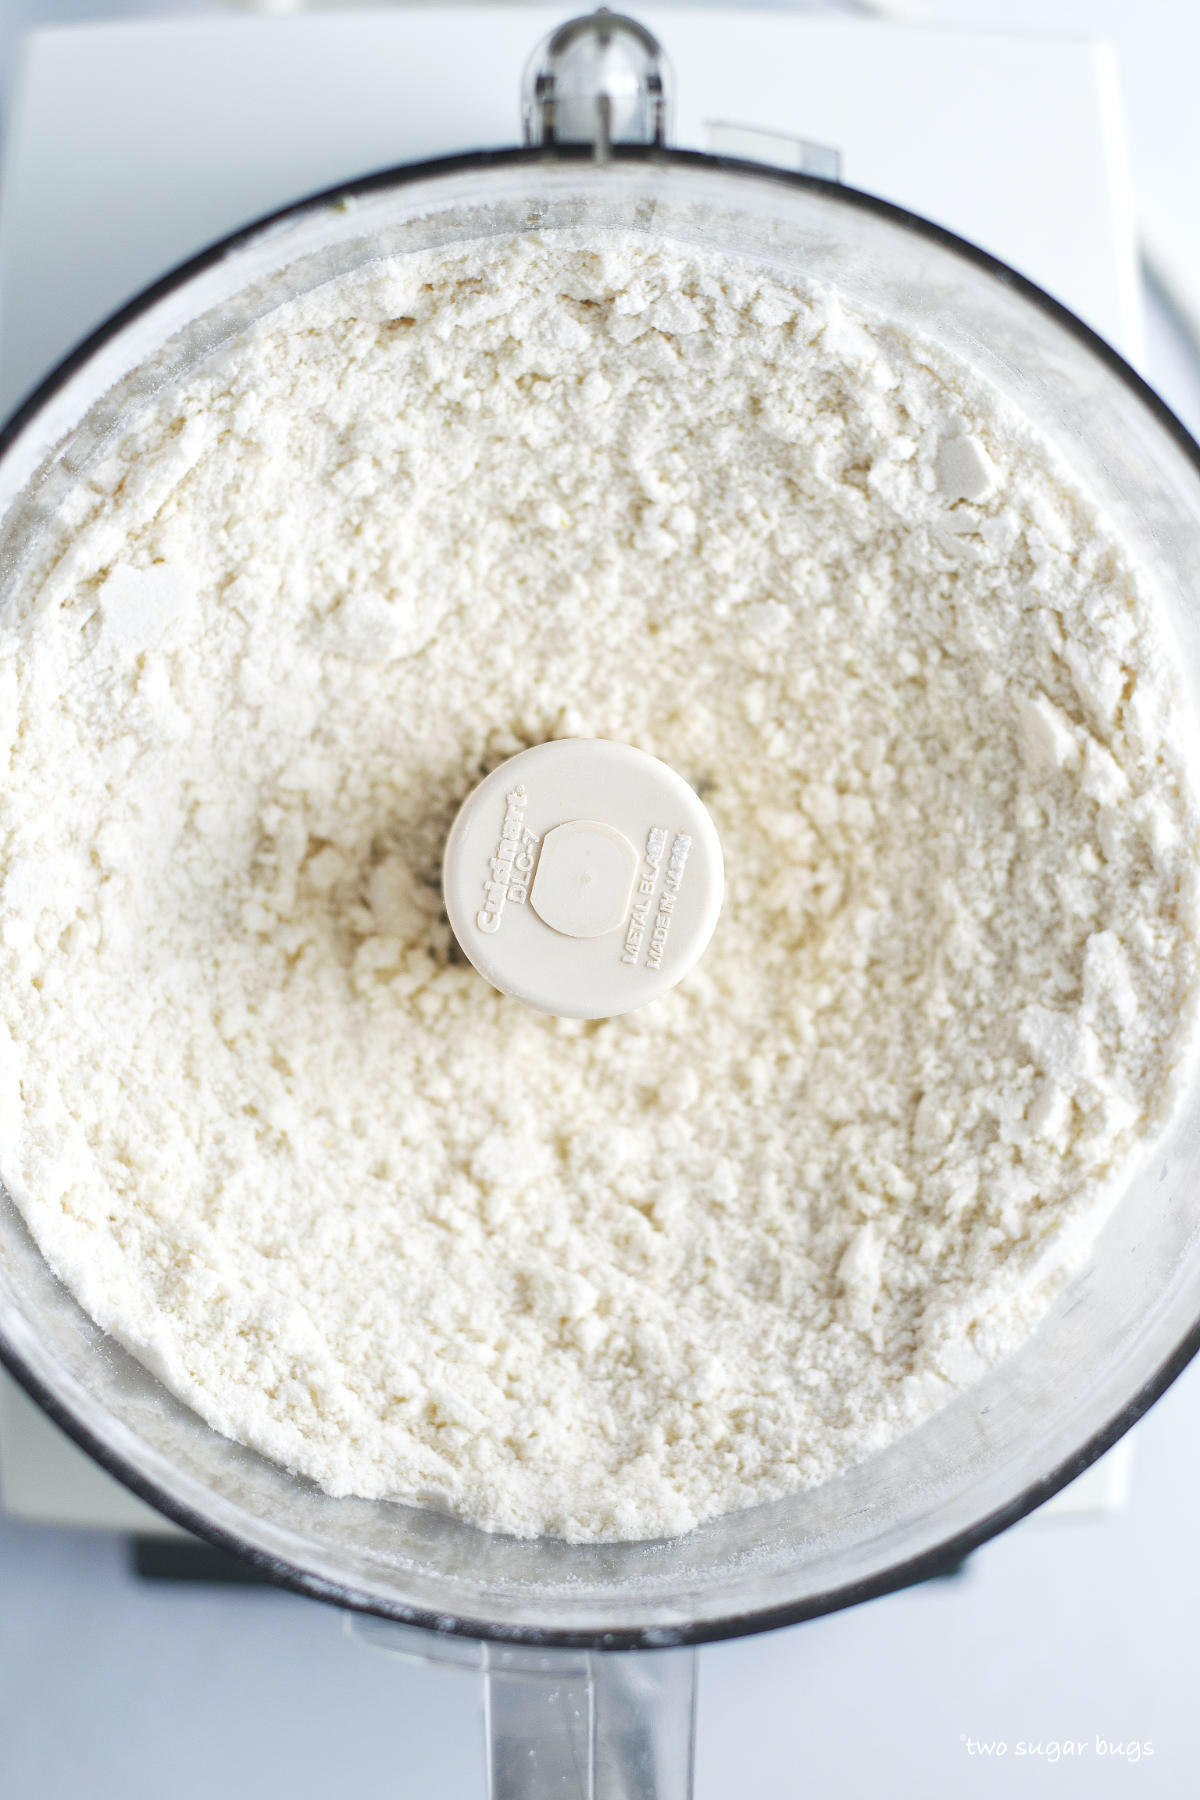 butter and dry ingredients combined in a food processor